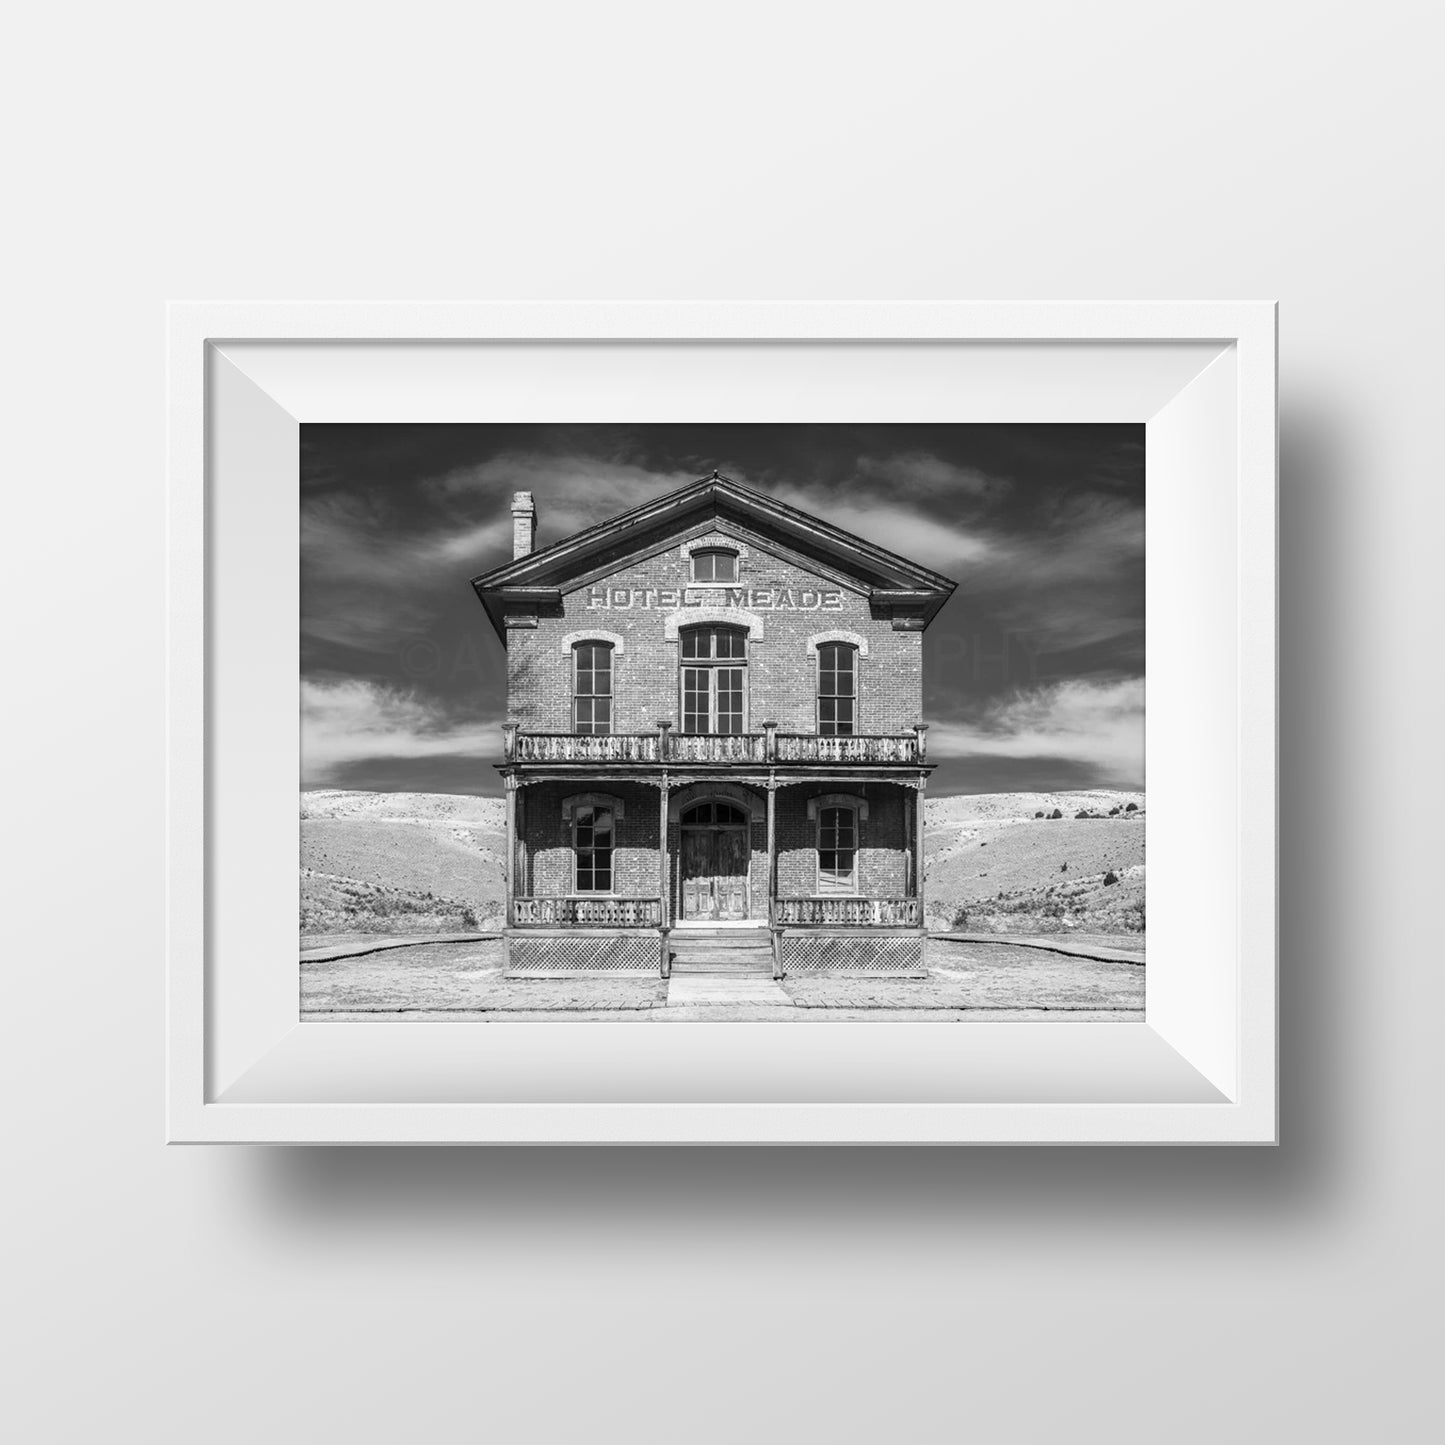 Kuva Collection<br> Historic Hotel Meade <br> Bannack Ghost Town Montana<br>Limited Release Archival B+W Print